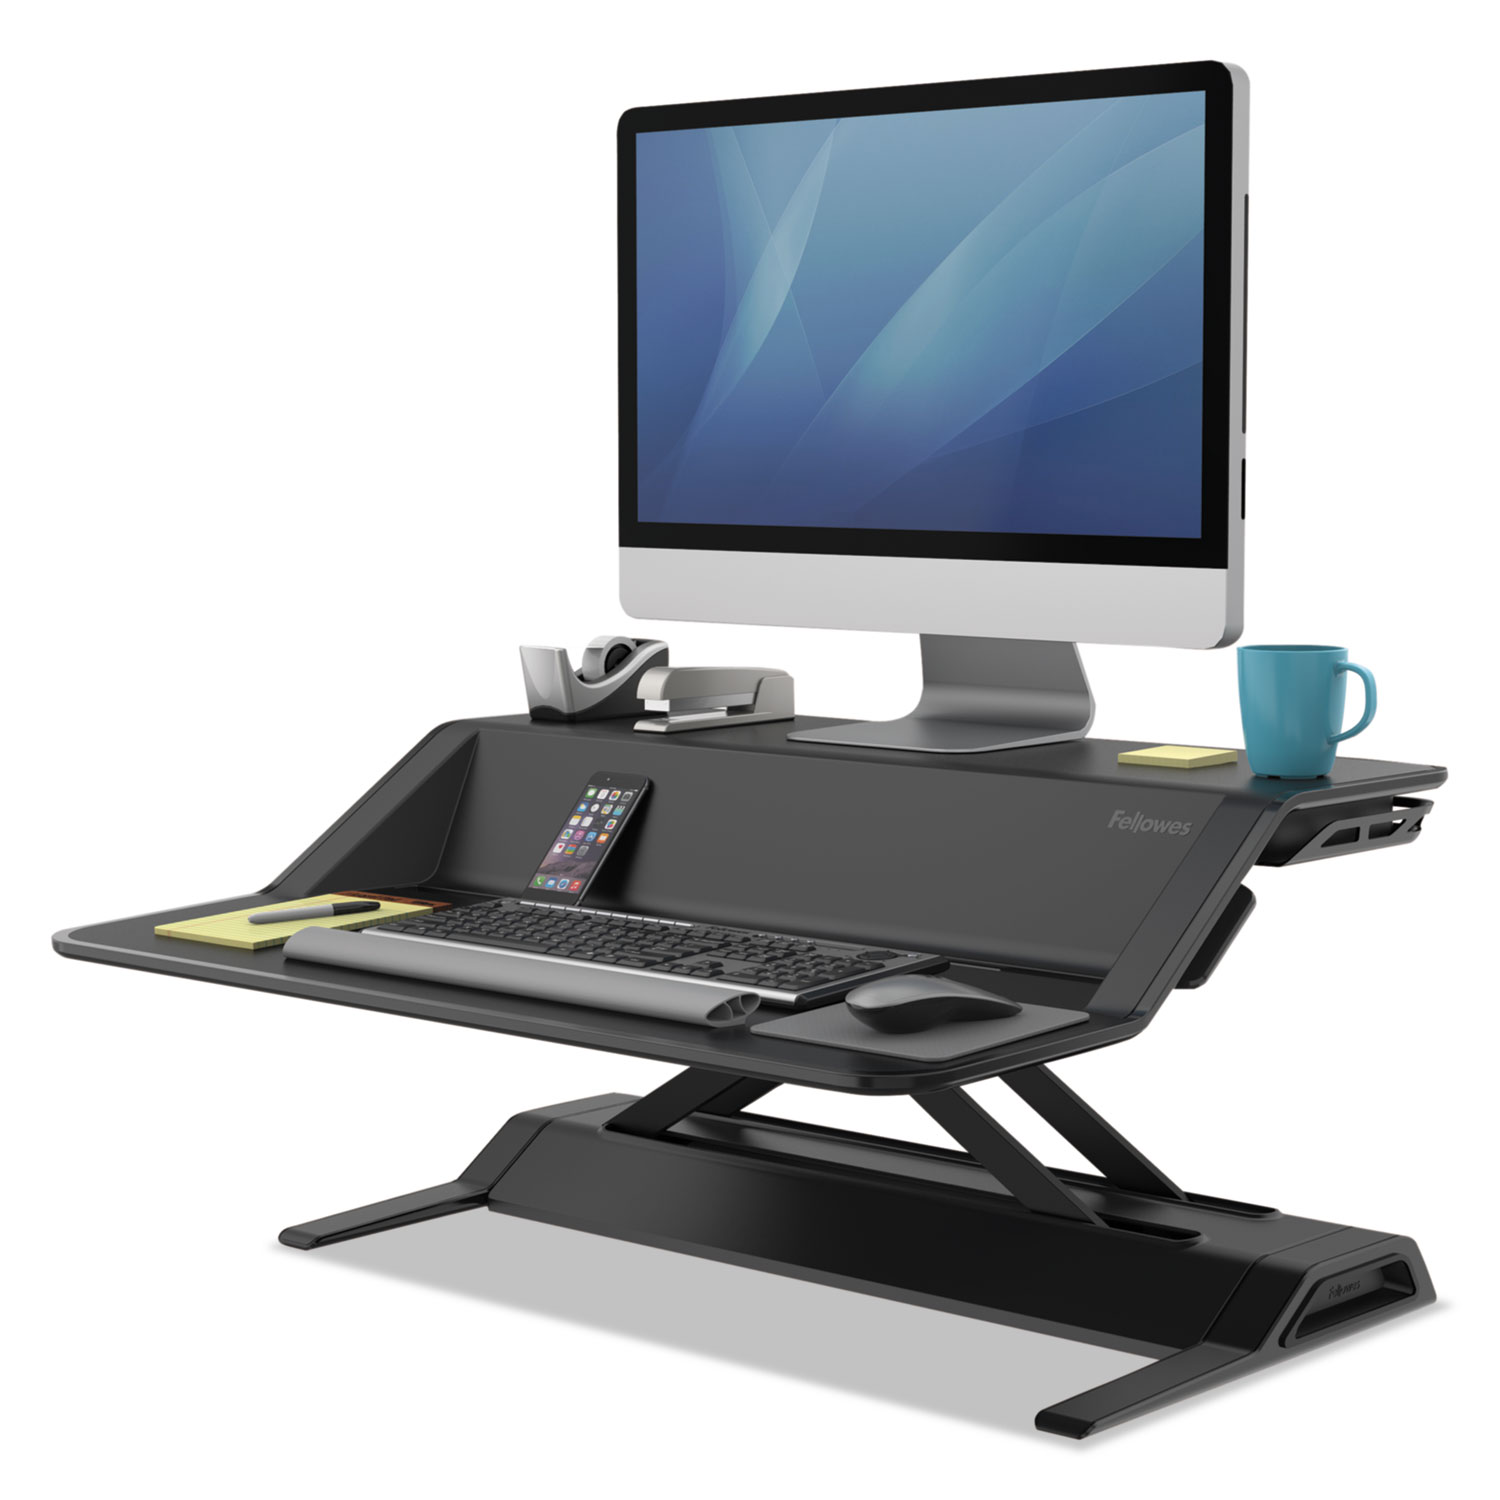  Fellowes 0007901 Lotus Sit-Stand Workstation, 32.75w x 24.25d x 5.5 to 22.5h, Black (FEL0007901) 